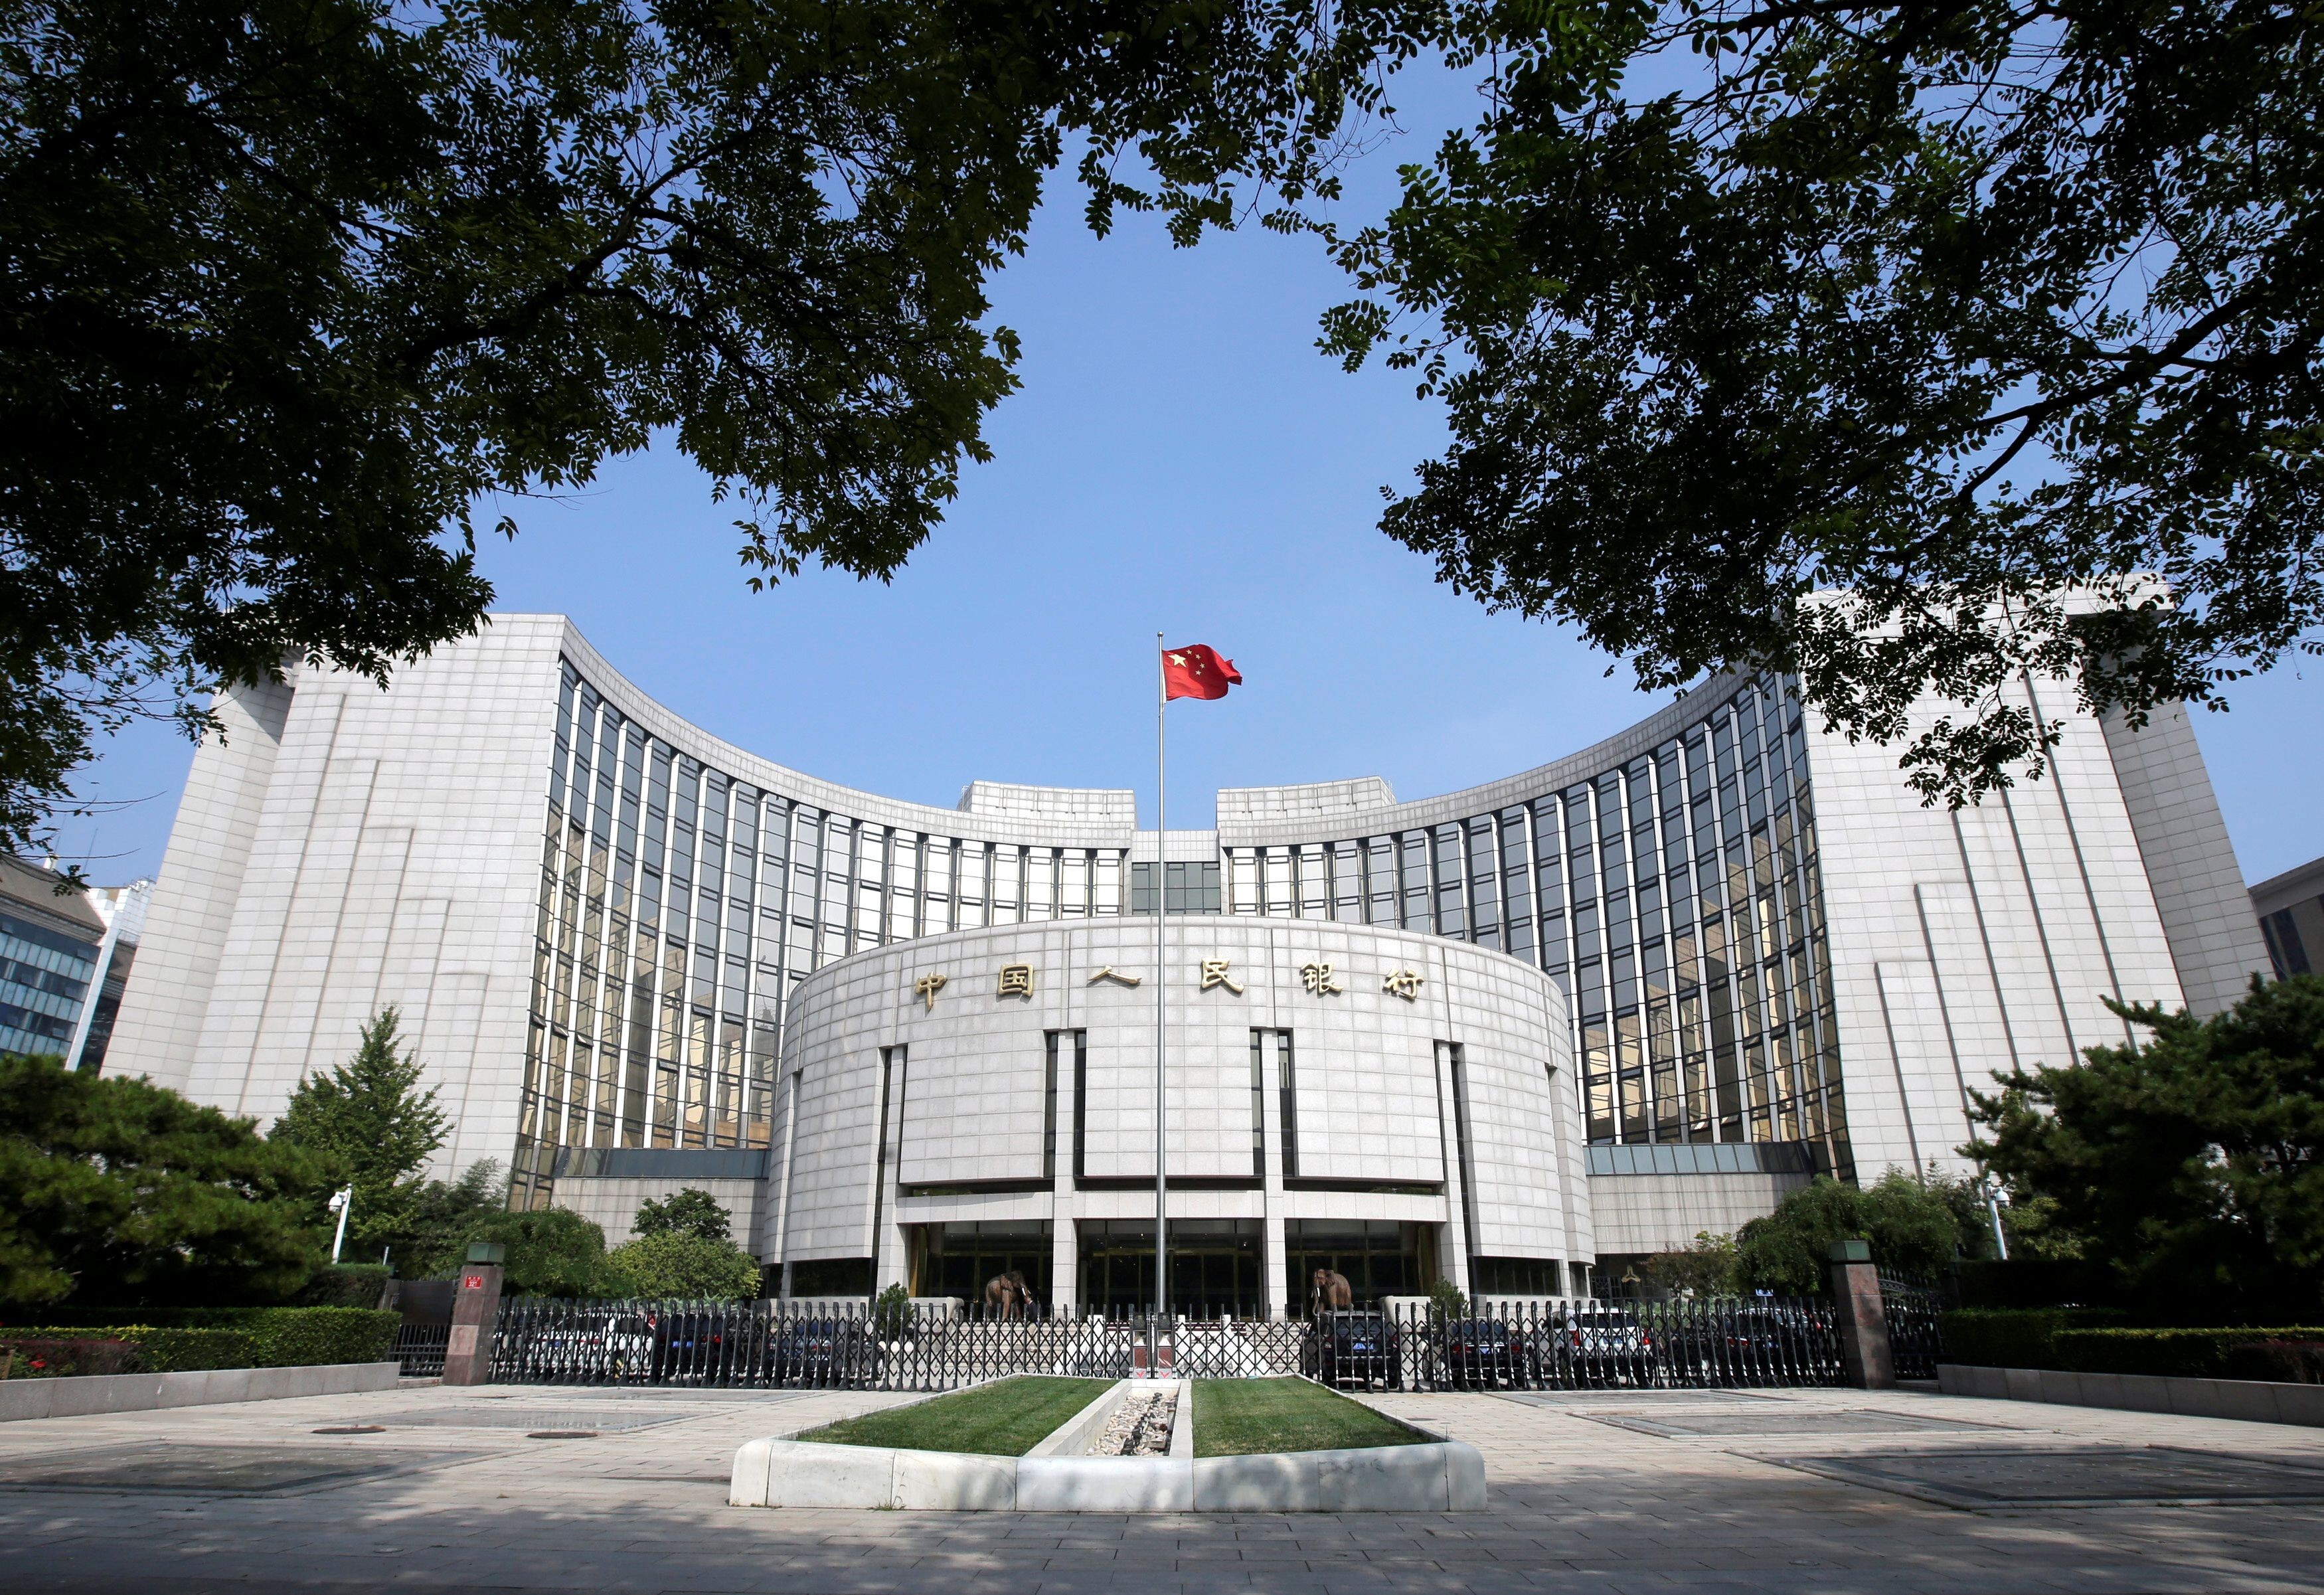 The People's Bank of China (PBOC), the central bank, is pictured in Beijing, China on September 28, 2018. Photo: Reuters